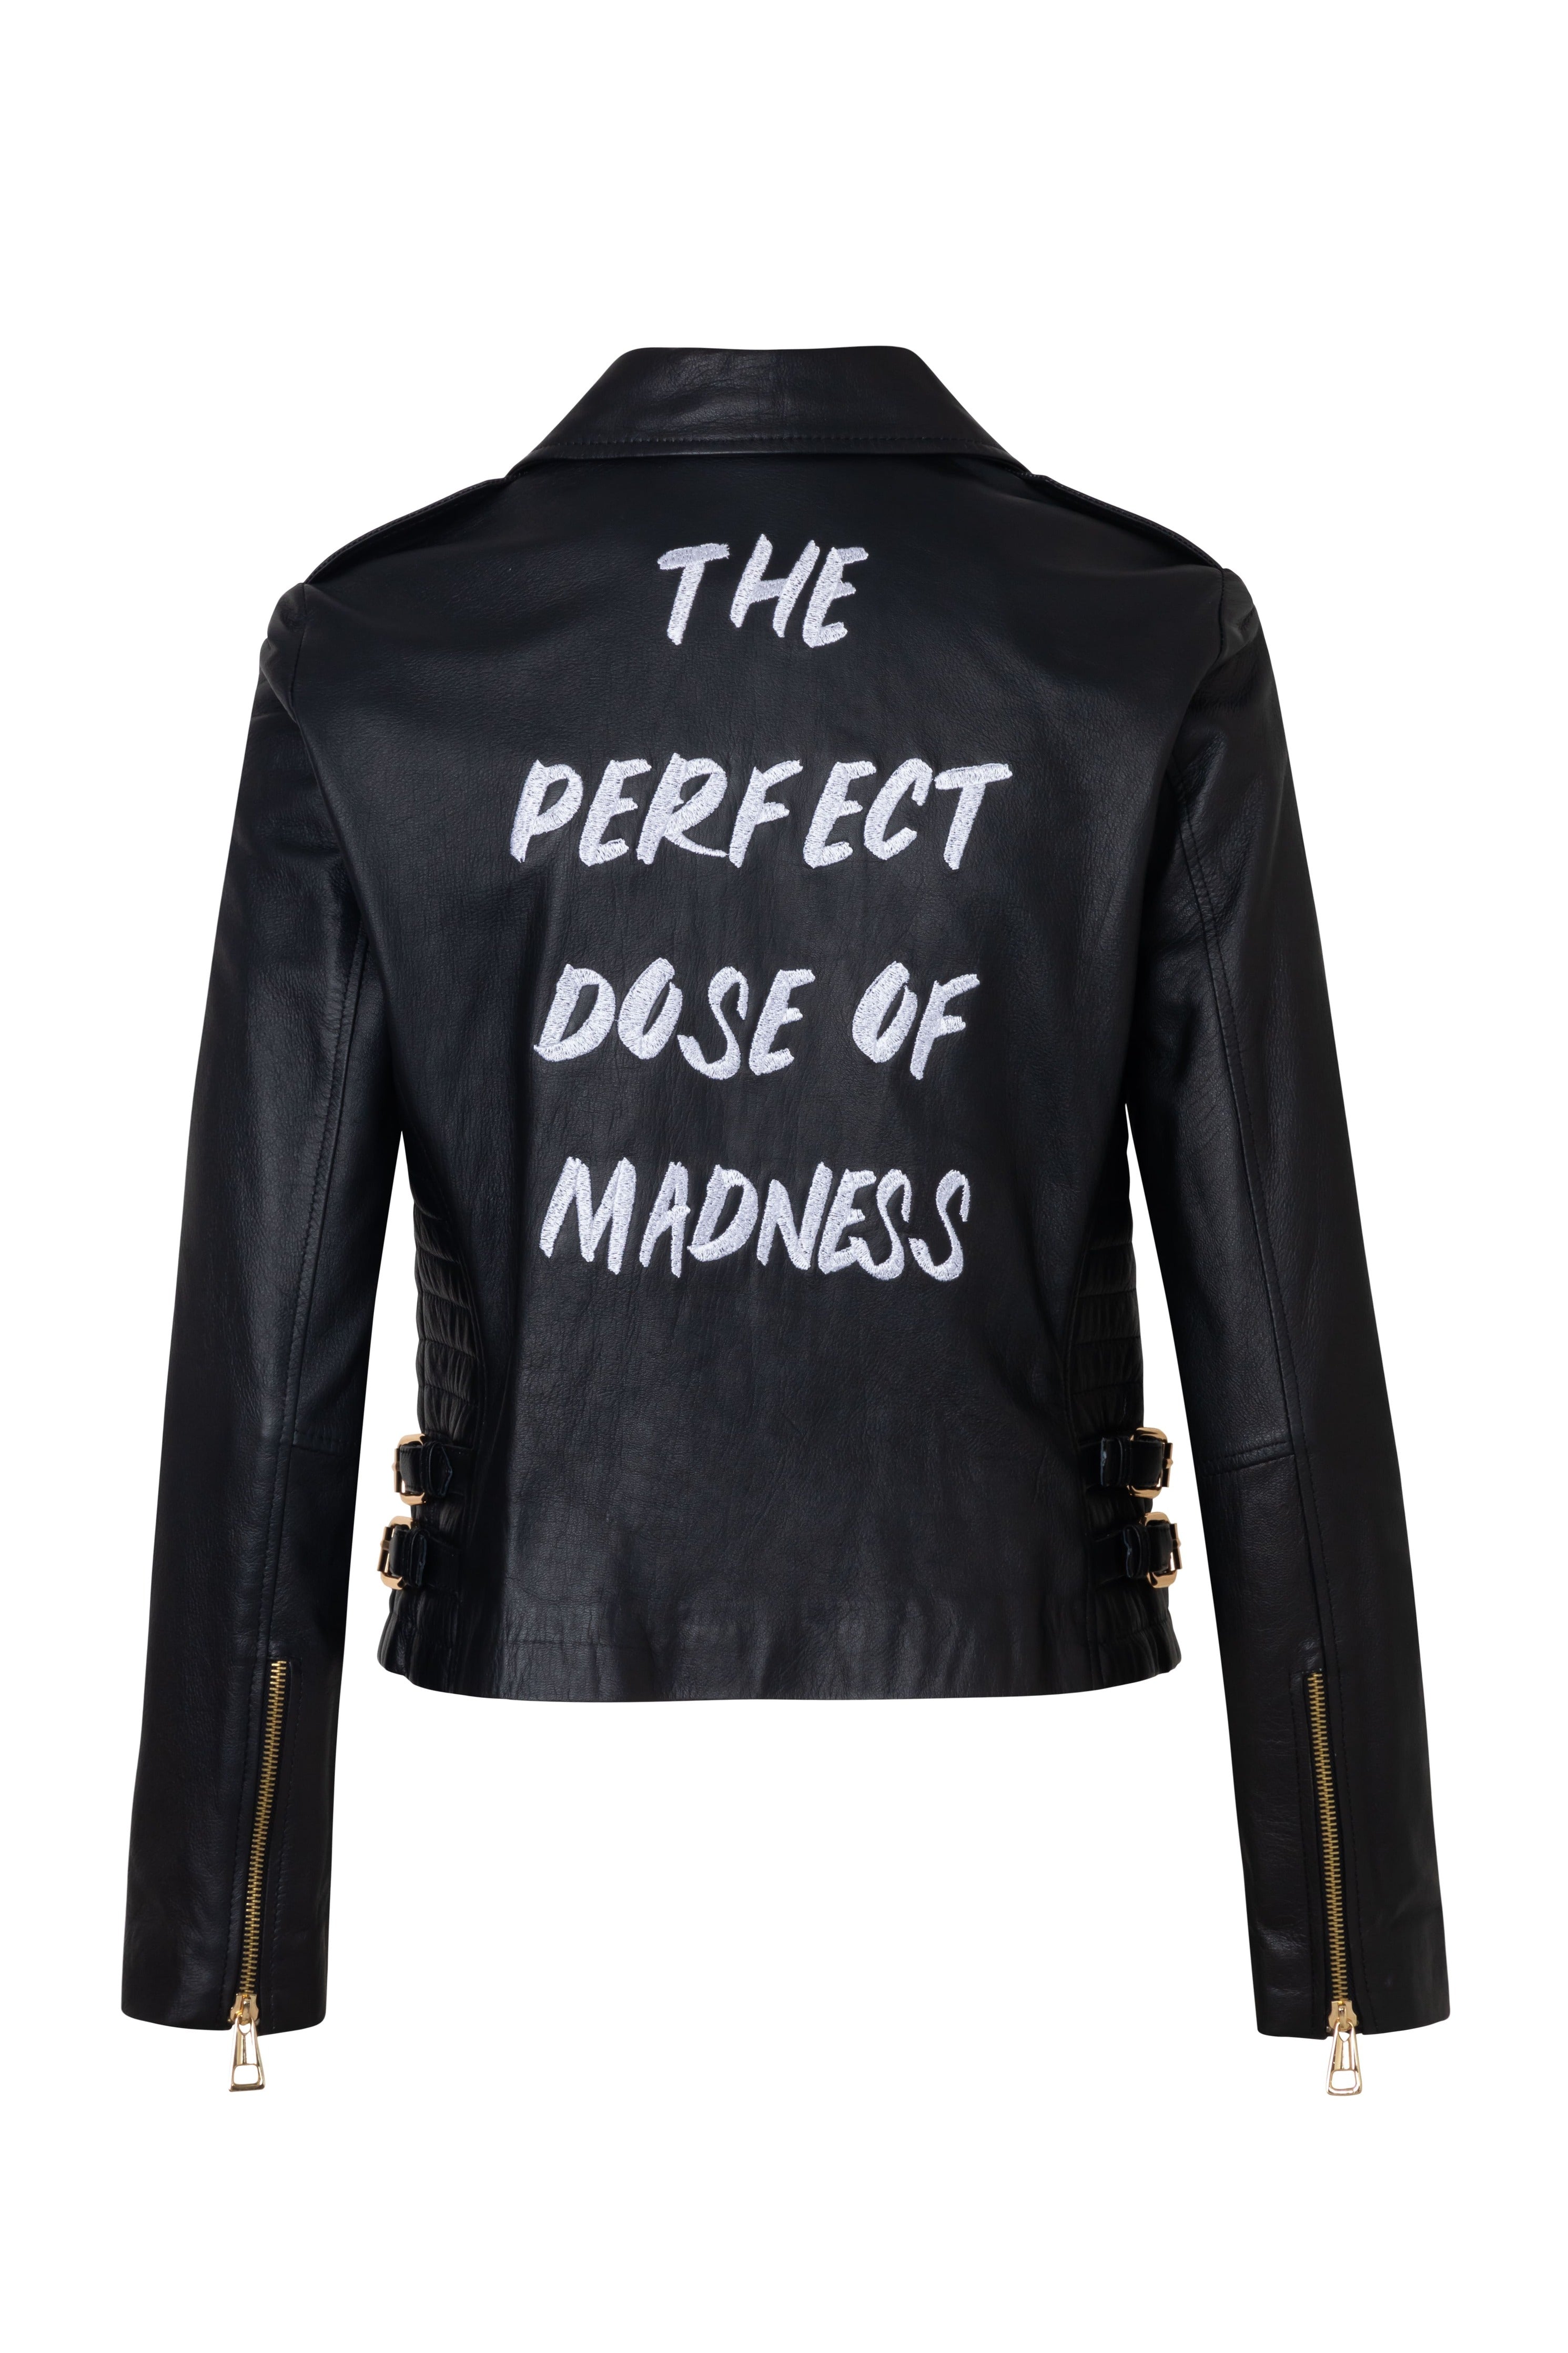 ROCK jacket - BLACK - the PERFECT dose OF madness -